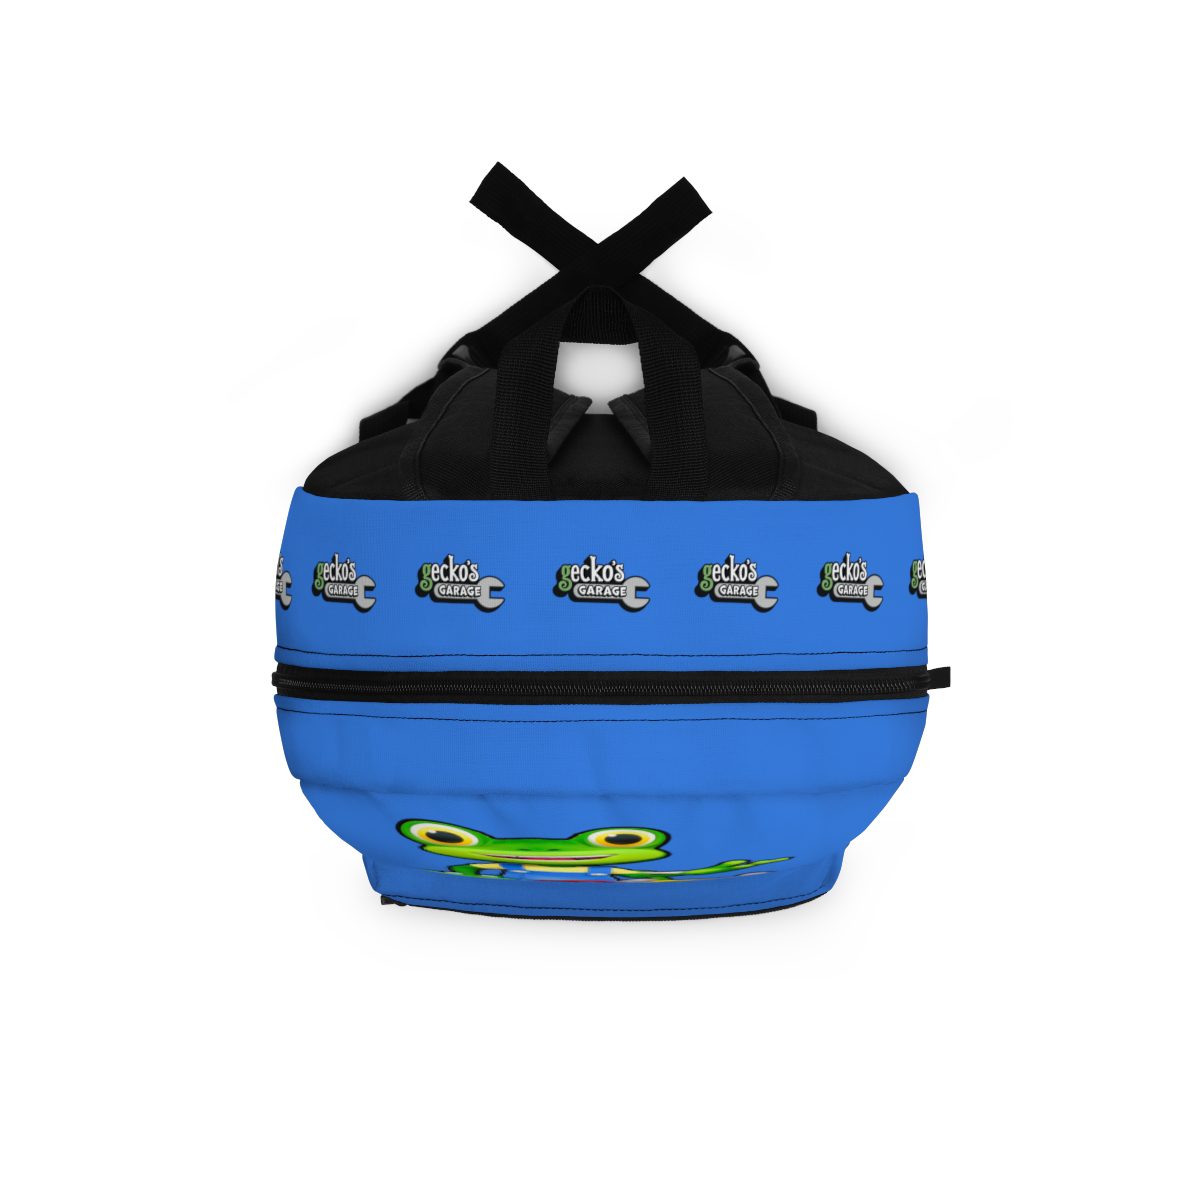 Blue Gecko’s Garage Animated Series Backpack – Adorable and Fun Cool Kiddo 16